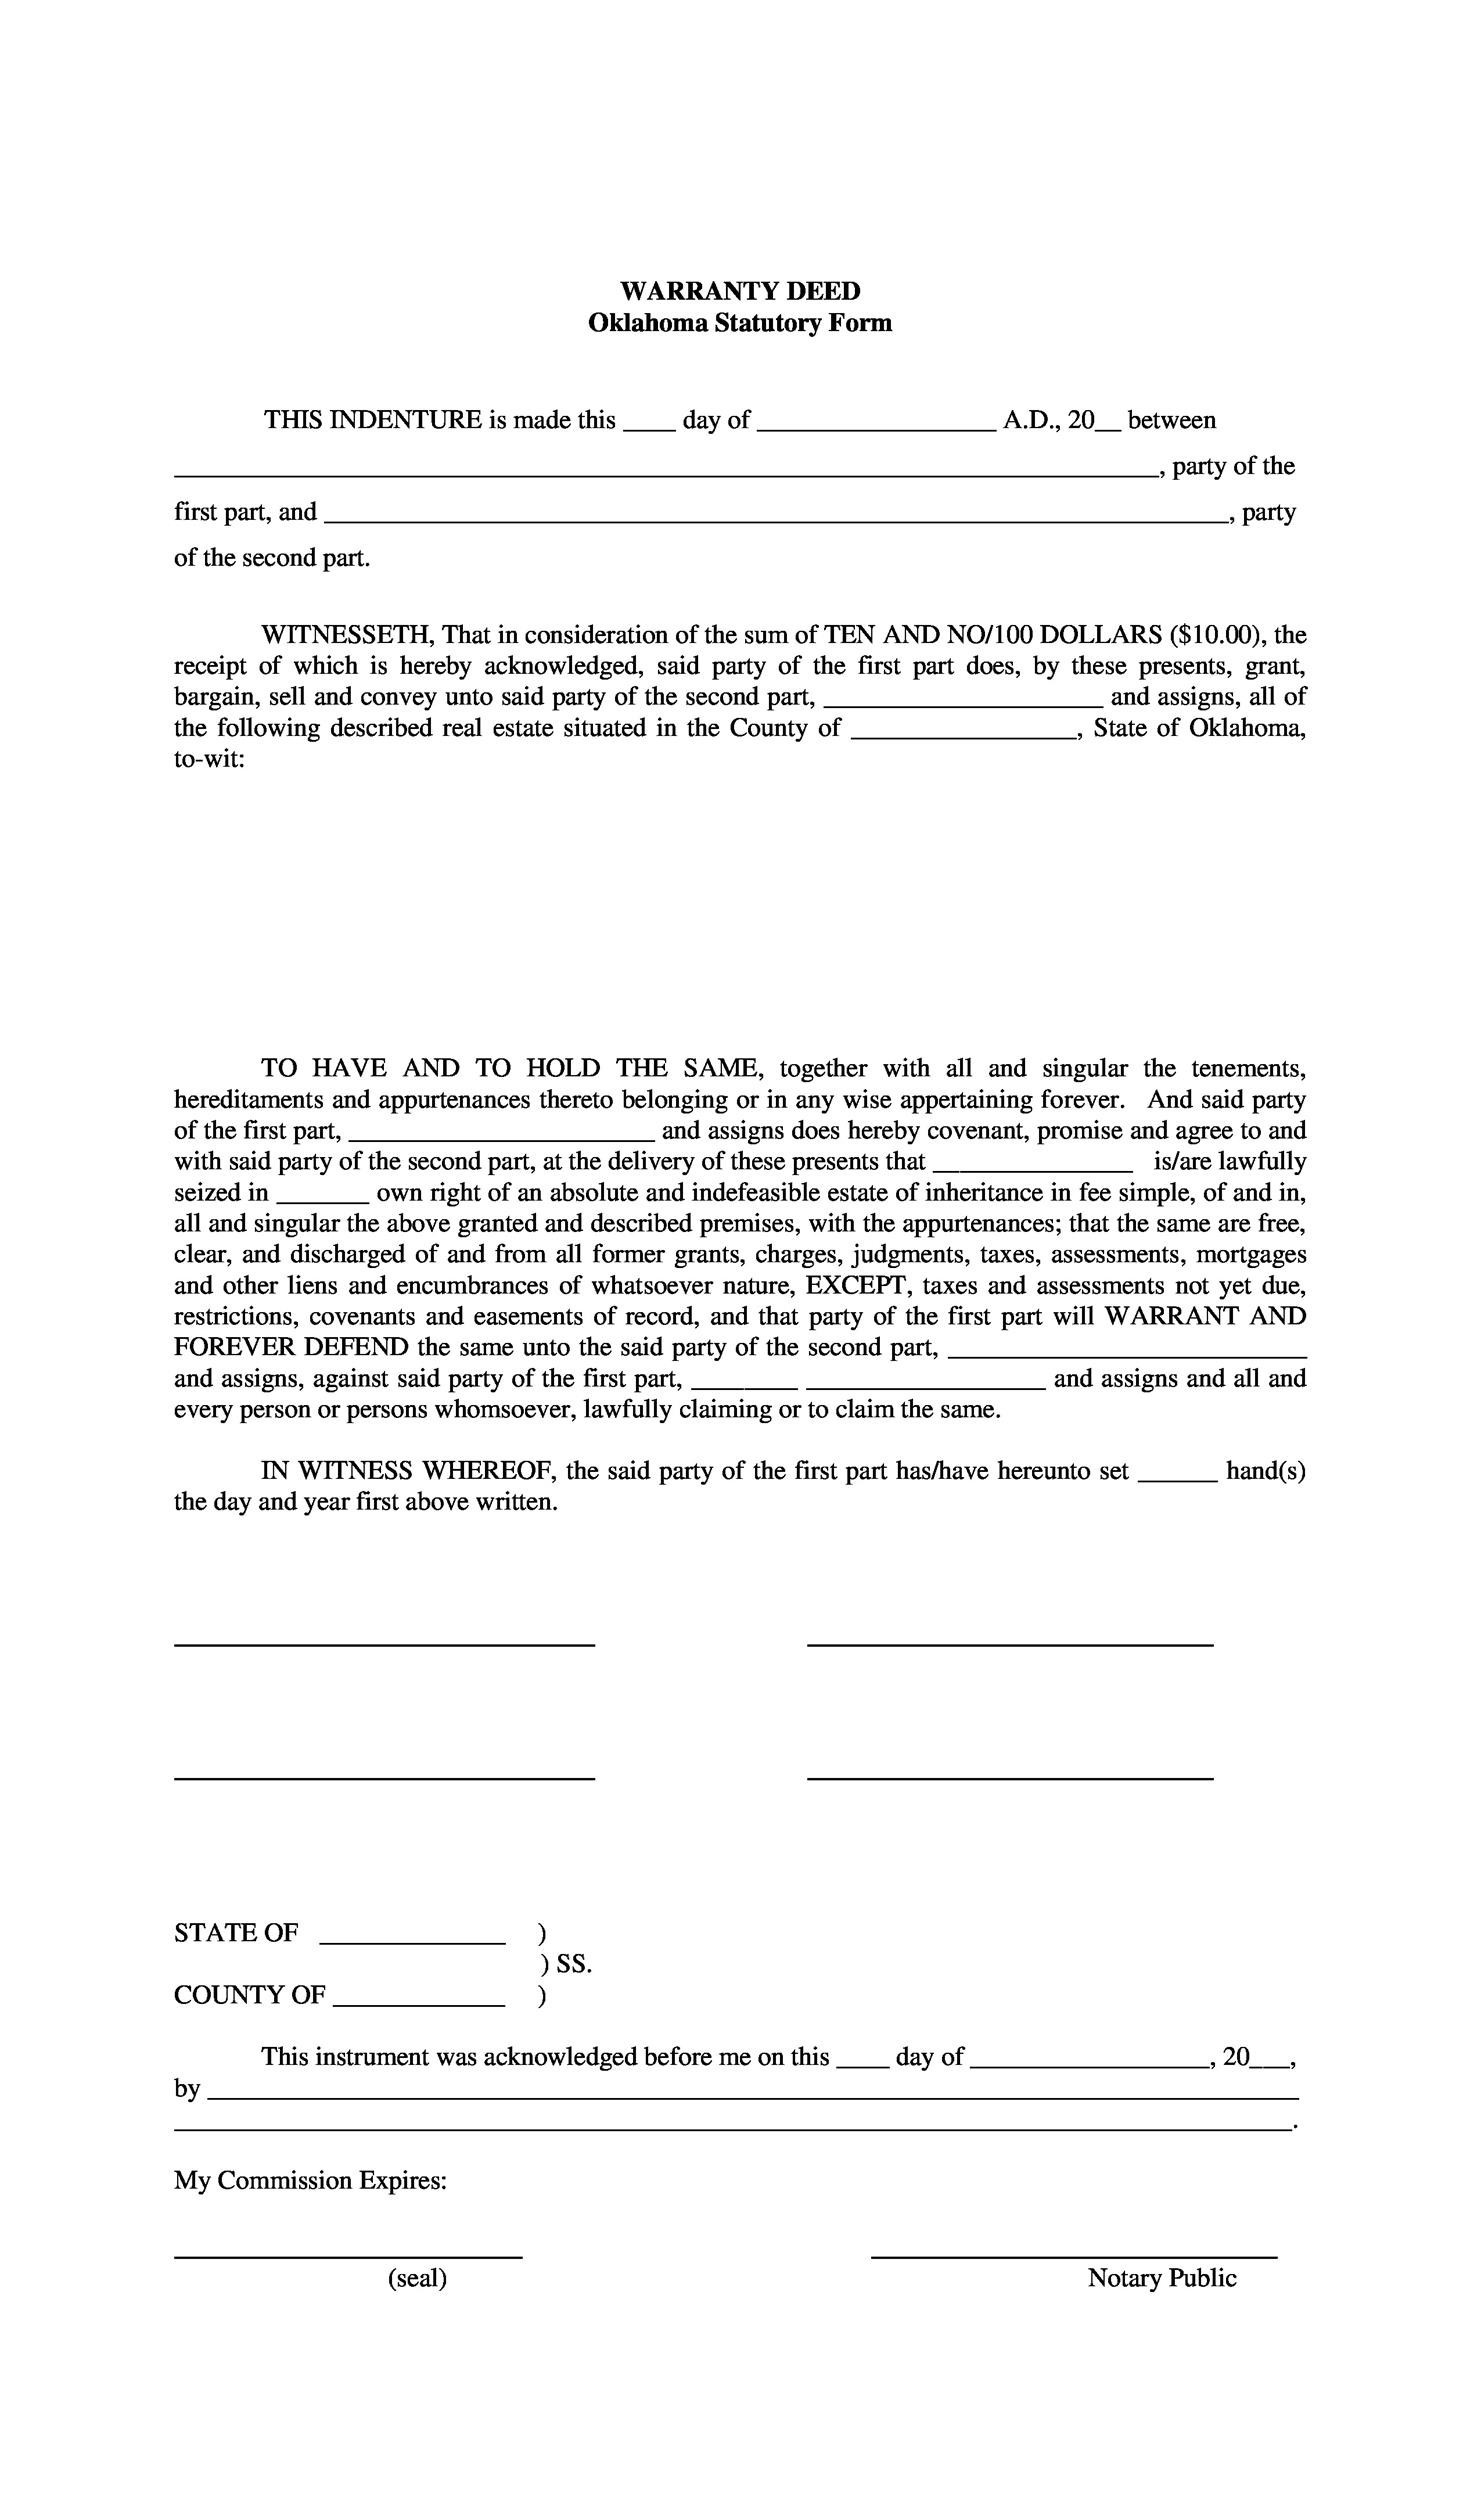 texas-special-warranty-deed-form-fill-out-and-sign-printable-pdf